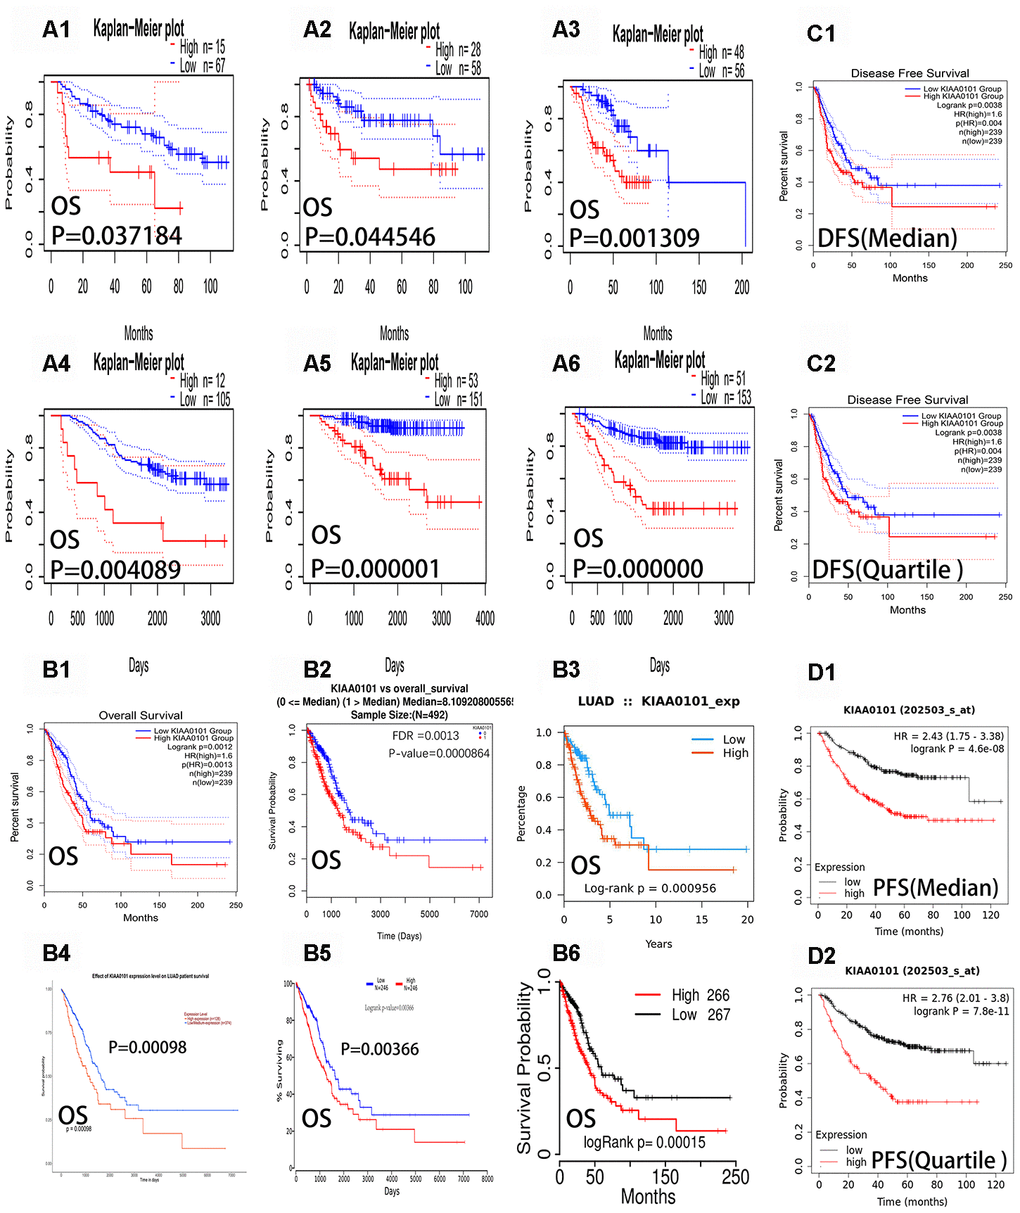 Overall survival curves, progression-free survival curves and disease-free survival curves of KIAA0101 in lung adenocarcinoma. The blue curves represent patients with lung adenocarcinoma with low expression of KIAA0101, and the red curves represent patients with lung adenocarcinoma with high expression of KIAA0101. (A1–A6) Six survival curves representing the six different data sets in Table 1 (from PrognoScan databases), respectively. (B1–B6) The six overall survival curves from the GEPIA, Linkedmics, Ualcan, TISIDB, Oncolnc, and TCGA portal databases, respectively. (C1–C2) Disease free survival curves (DFS) of KIAA0101 from the GEPIA database. (D1–D2) Progression free survival curves (PFS) of KIAA0101 from Kaplan Meier-plotter.